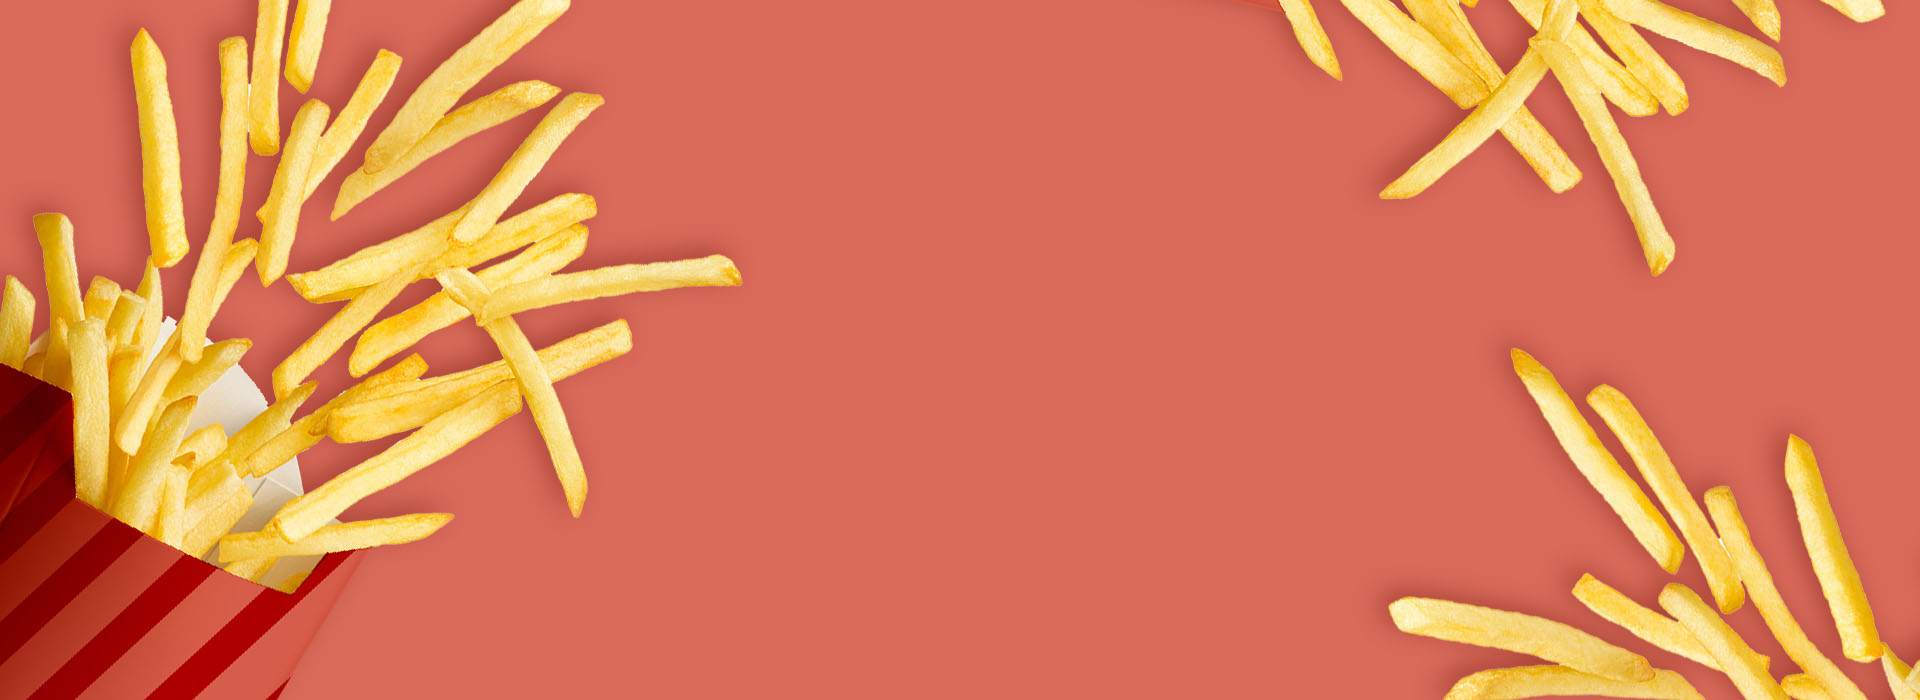 A container of fries spilled across a light red background.